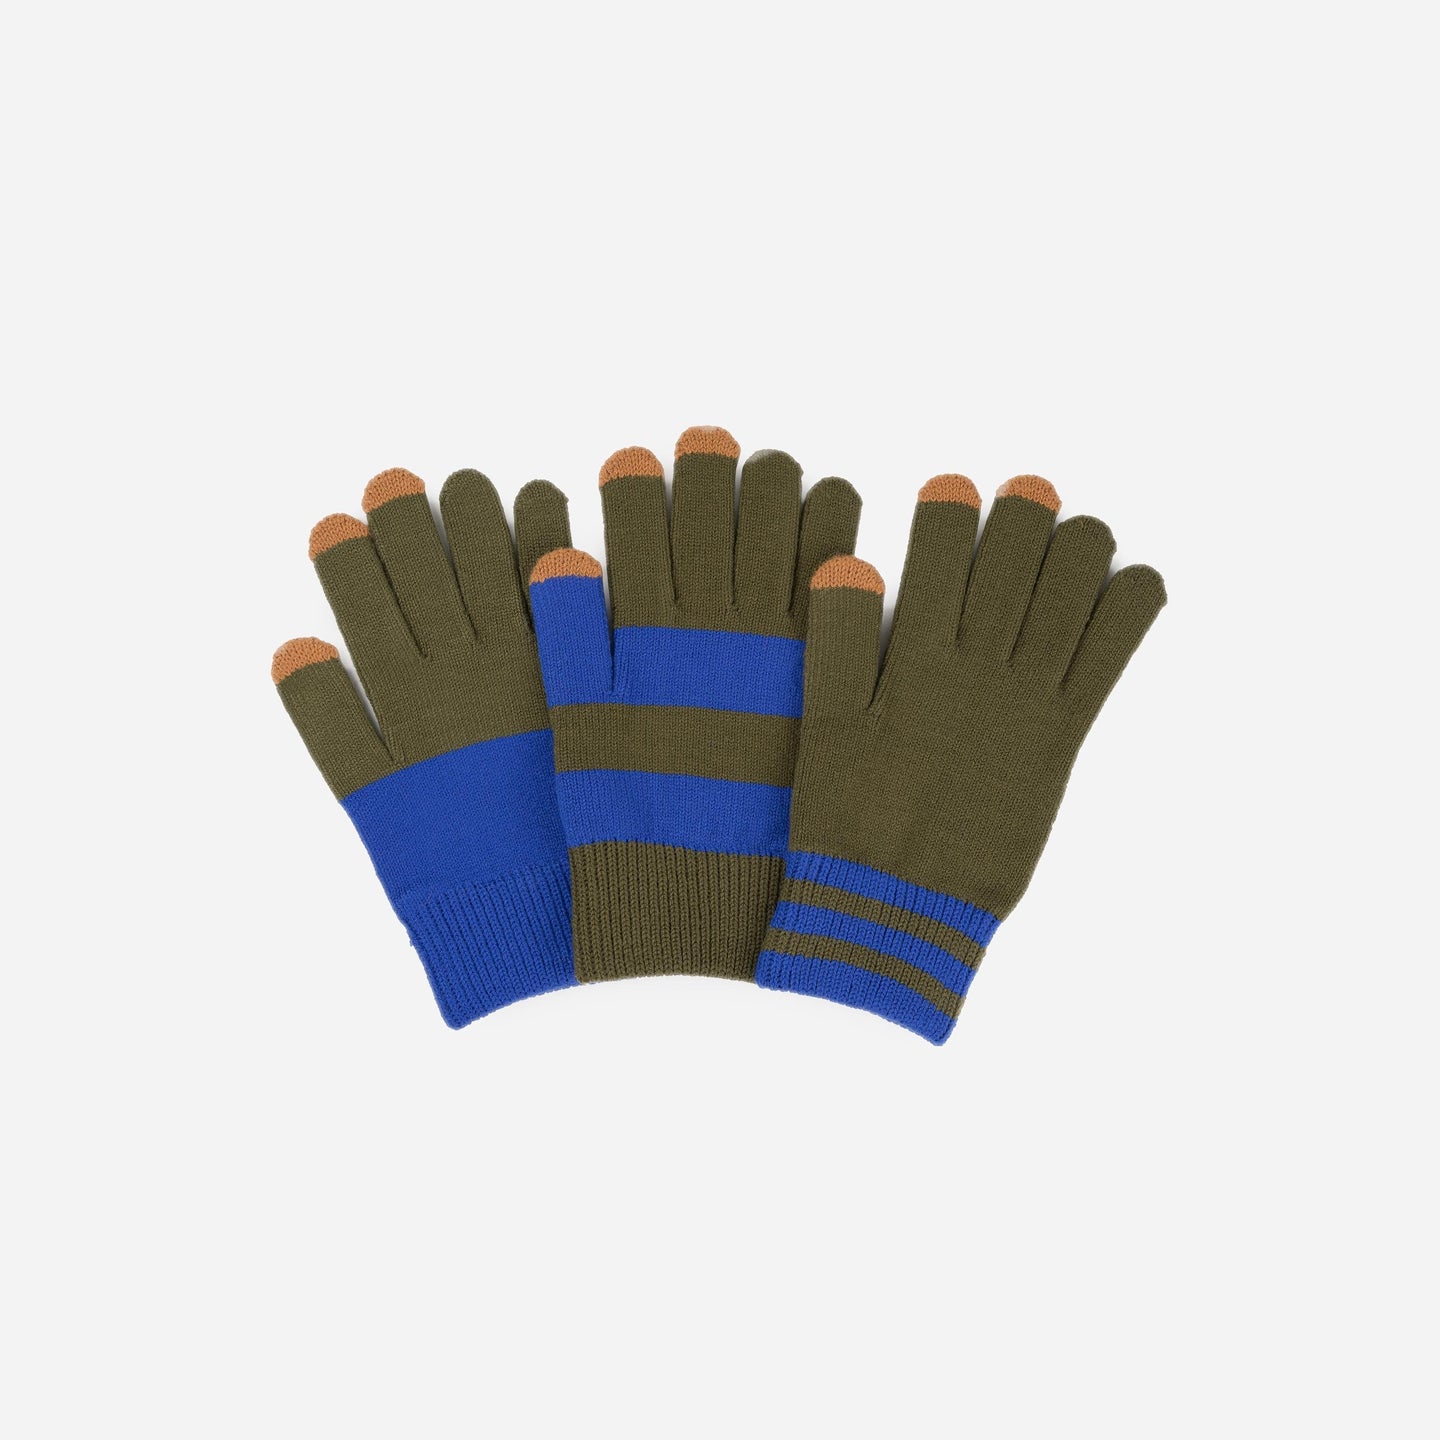 Pair and Spare 3 Gloves Set